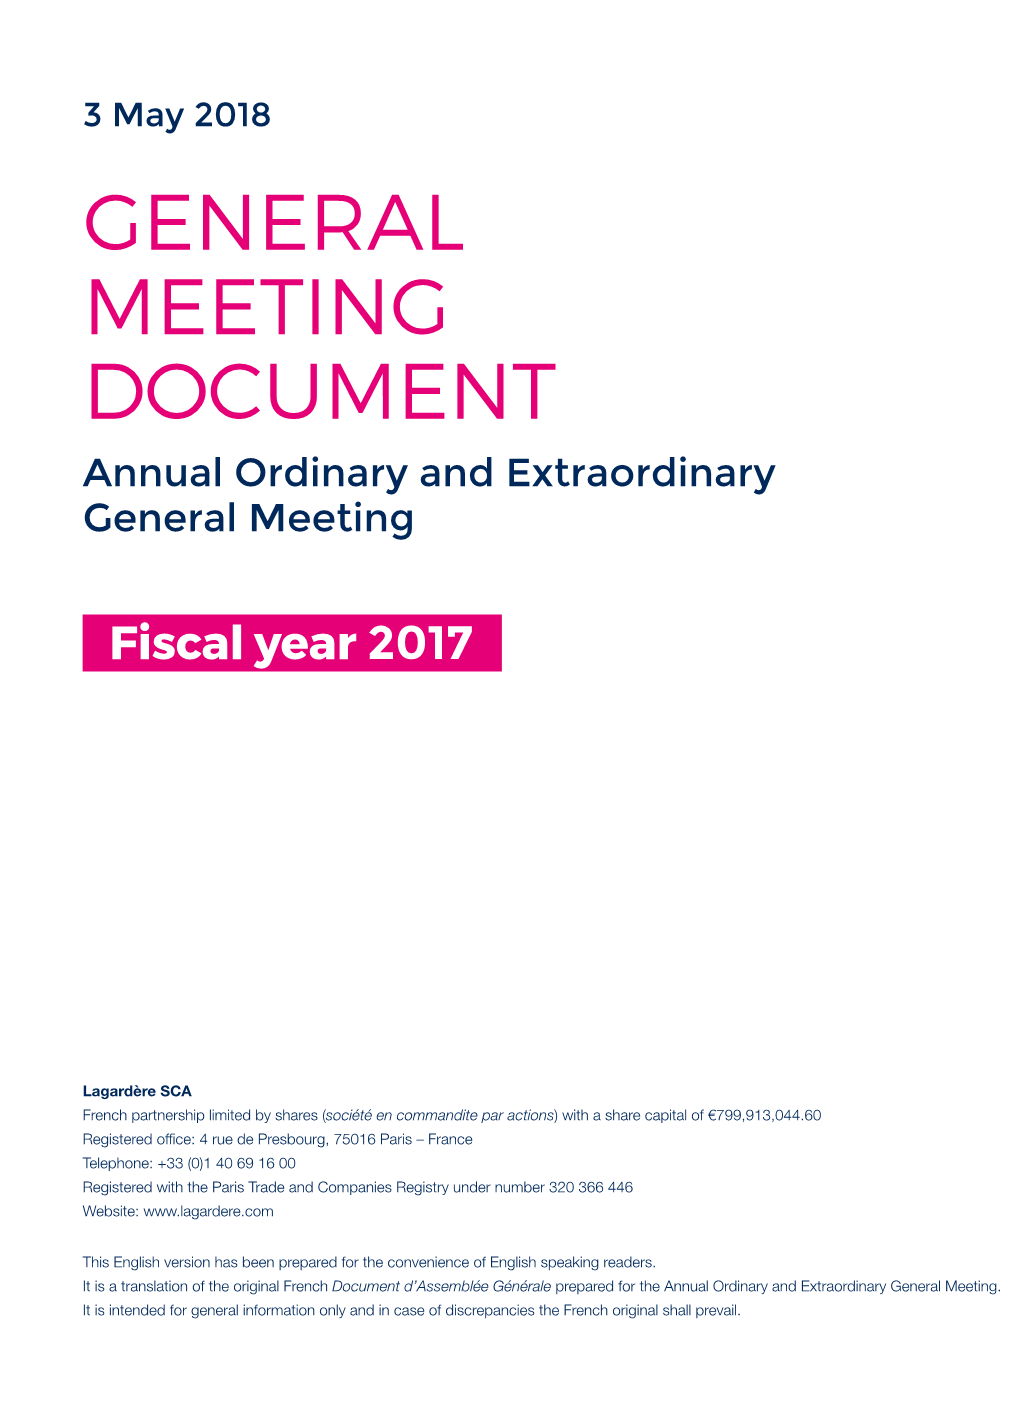 2018 GENERAL MEETING DOCUMENT Annual Ordinary and Extraordinary General Meeting